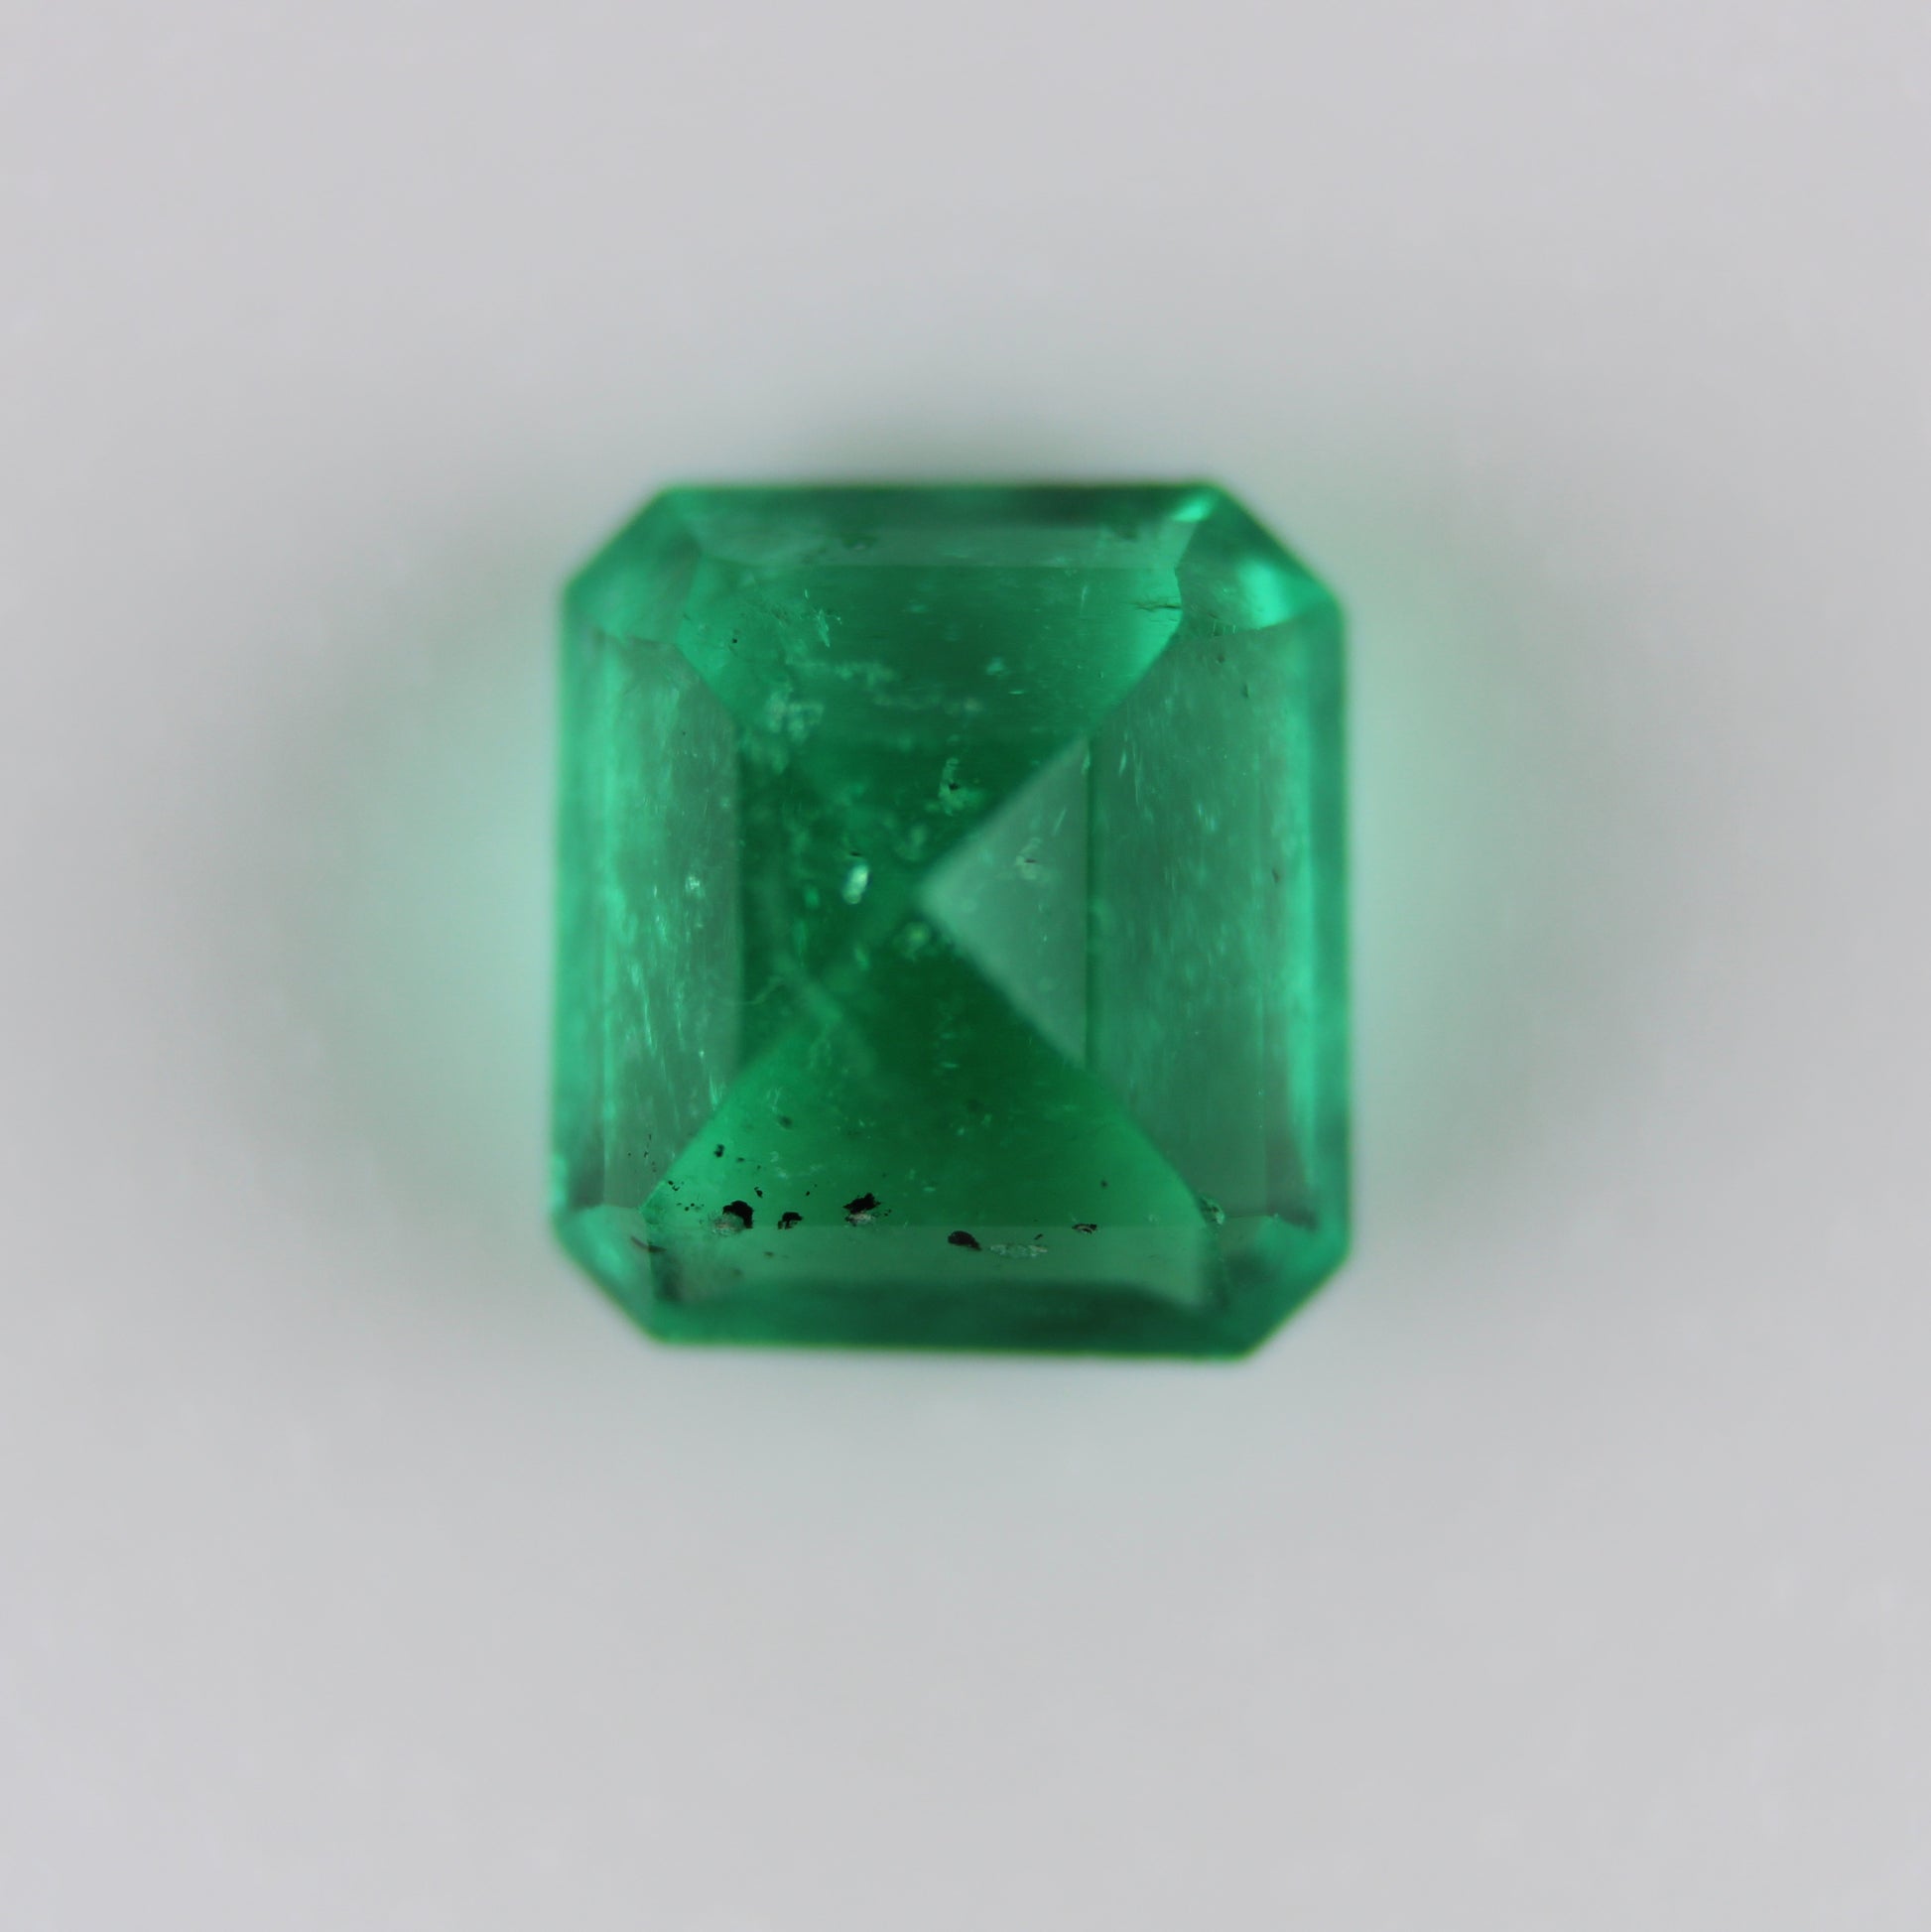 0.34 Ct Colombian Emerald | Northern Gem Supply